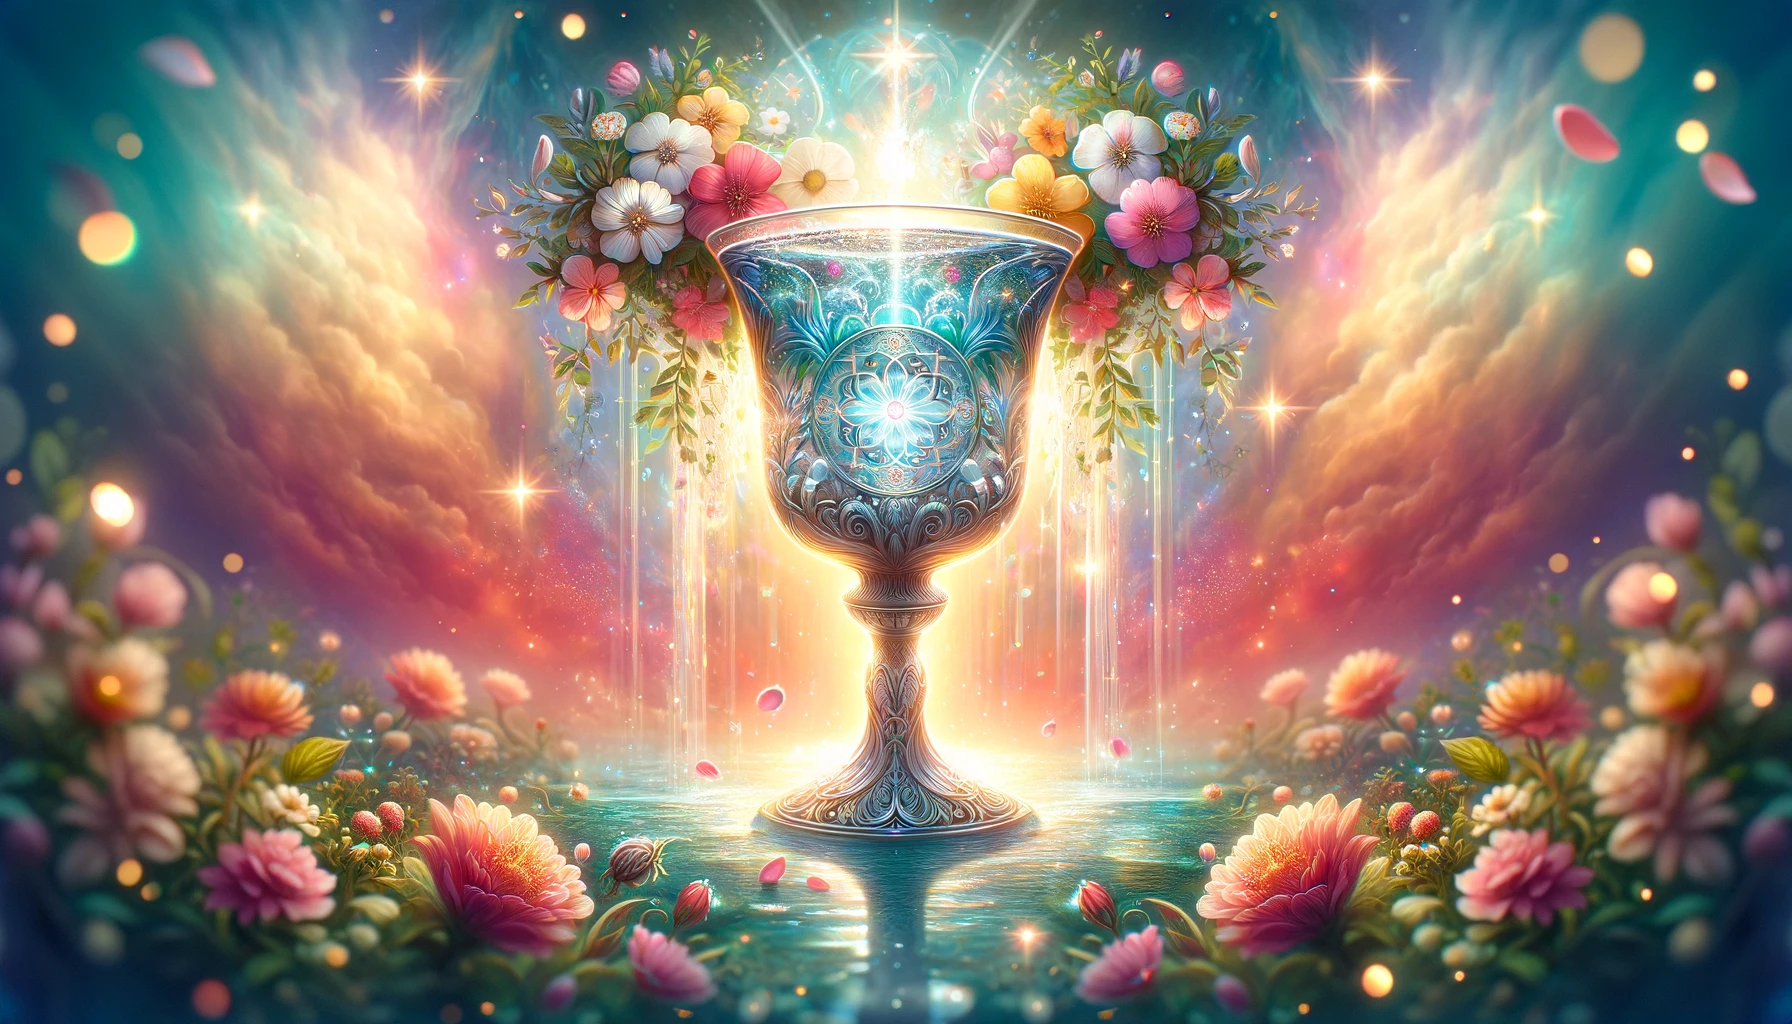 A serene scene depicting the Ace of Cups tarot card The central focus is an overflowing chalice intricately designed and adorned with blooming flowers The chalice is filled with clear